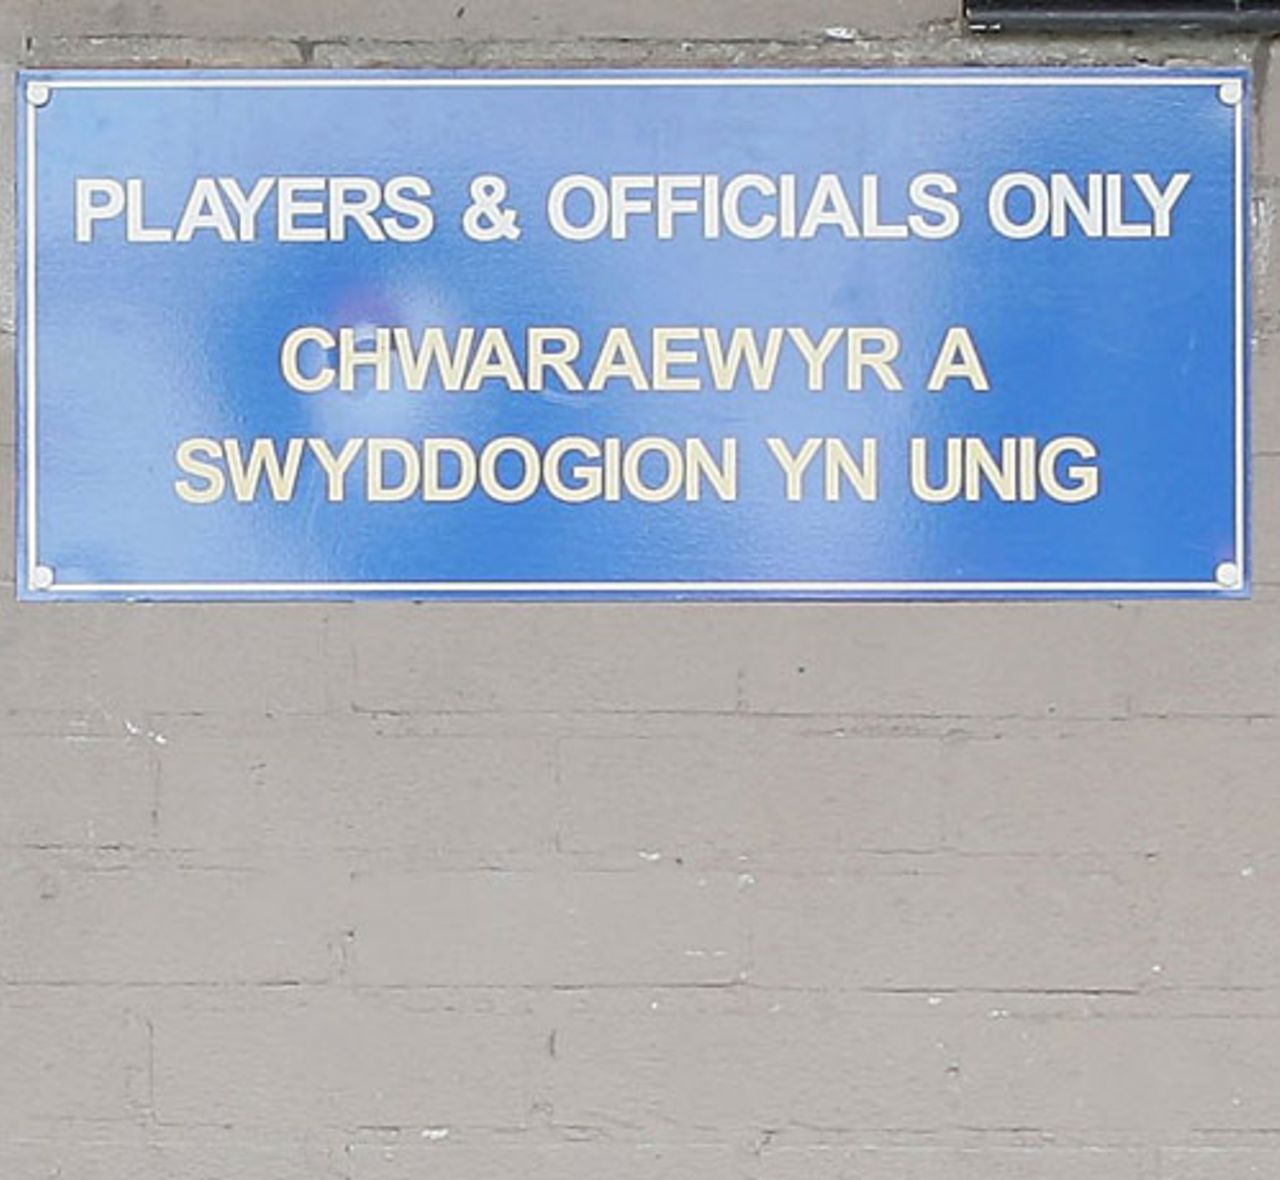 A sign in English and Welsh at the Sophia Gardens, August 29, 2006